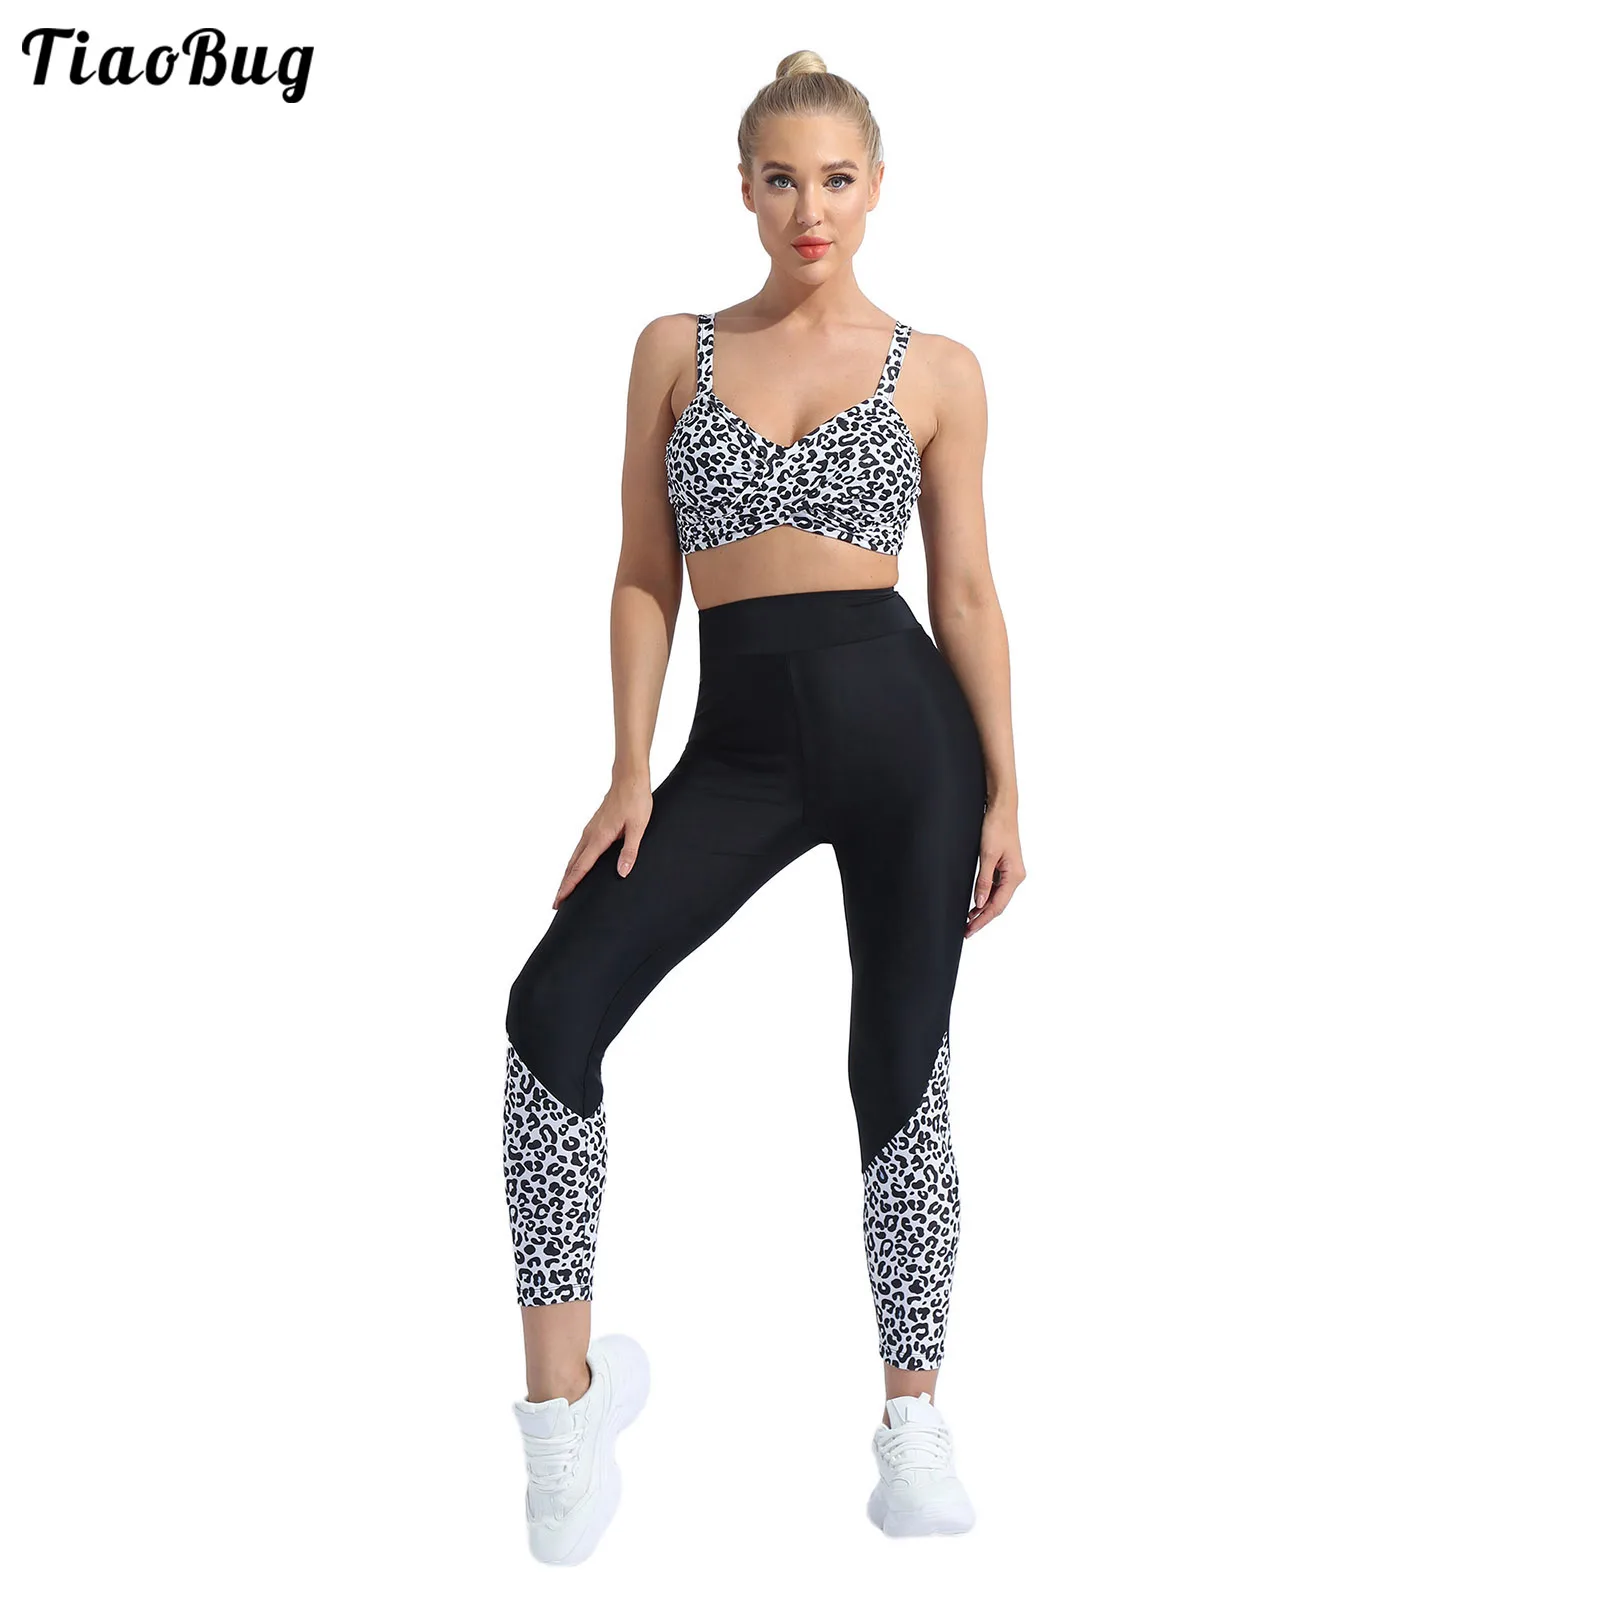 

TiaoBug Summer Women Clothing Yoga Suit Sleeveless Knotted V-Neck Printed Padded Top With Elastic Waistband Leggings Sport Sets